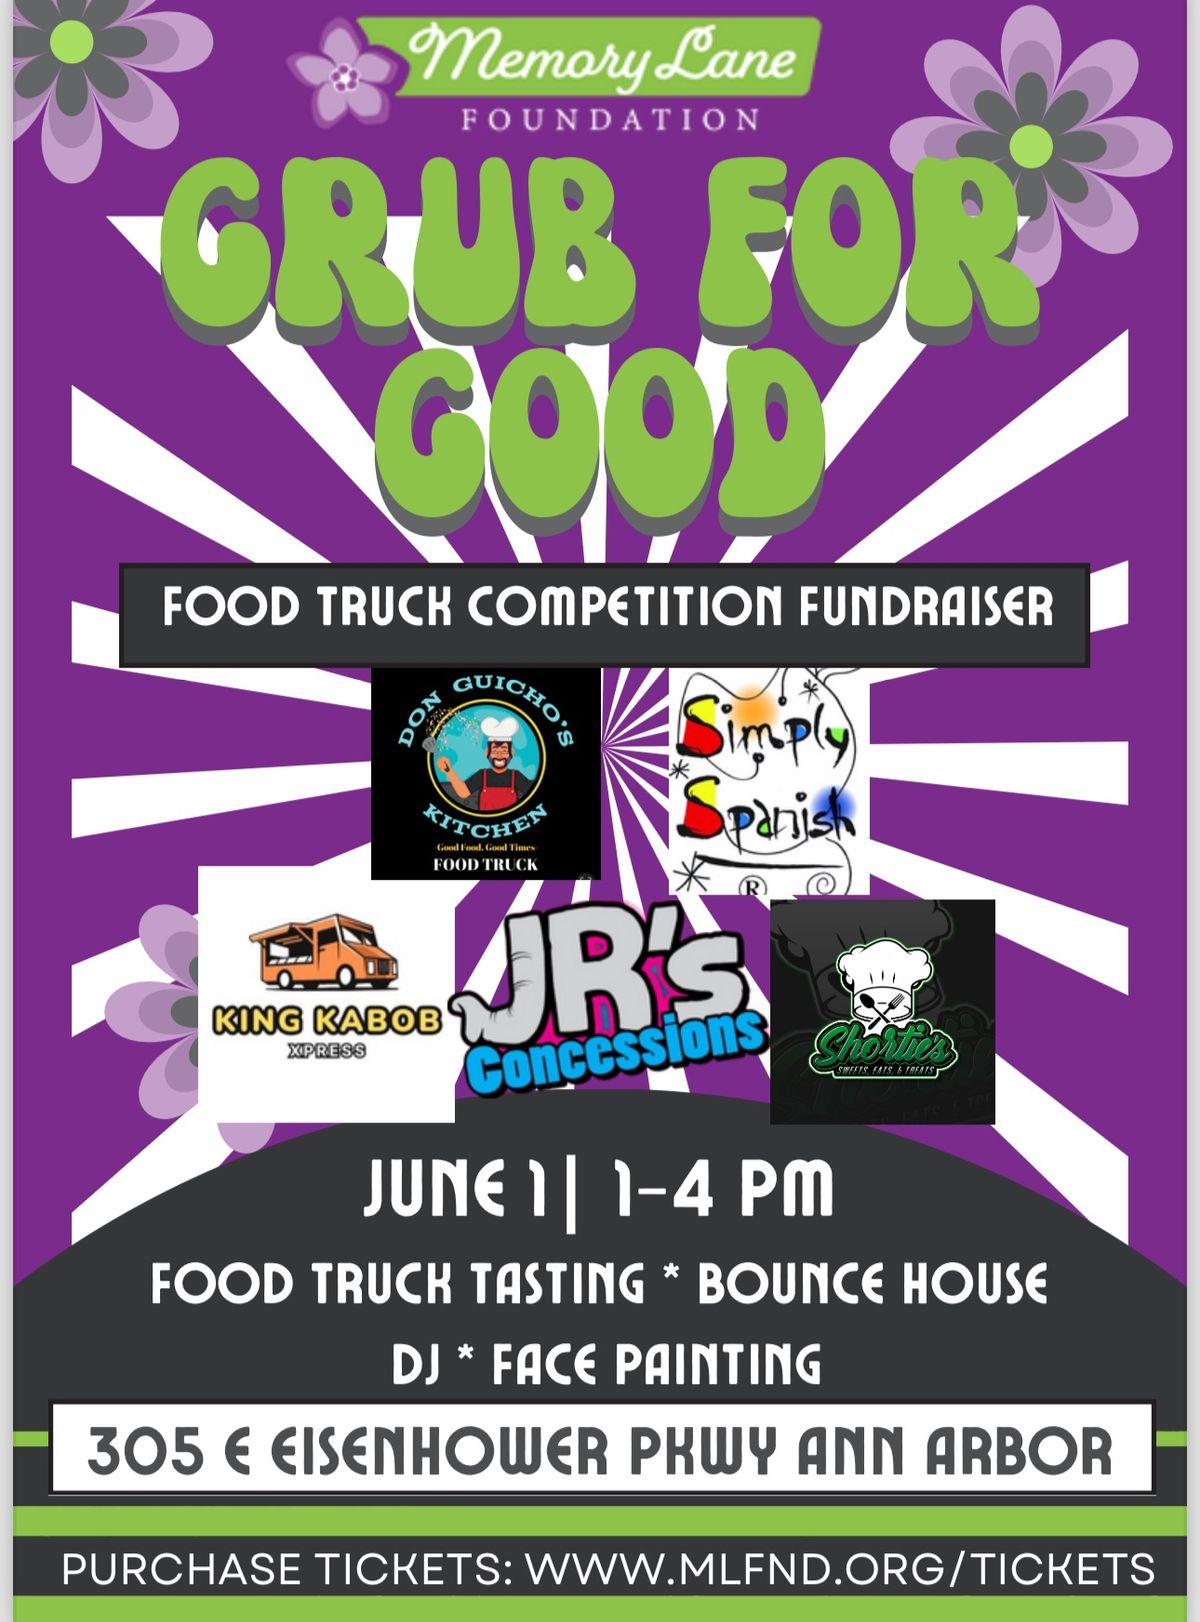 Memory Lane Foundation\u2019s Food Truck Competition